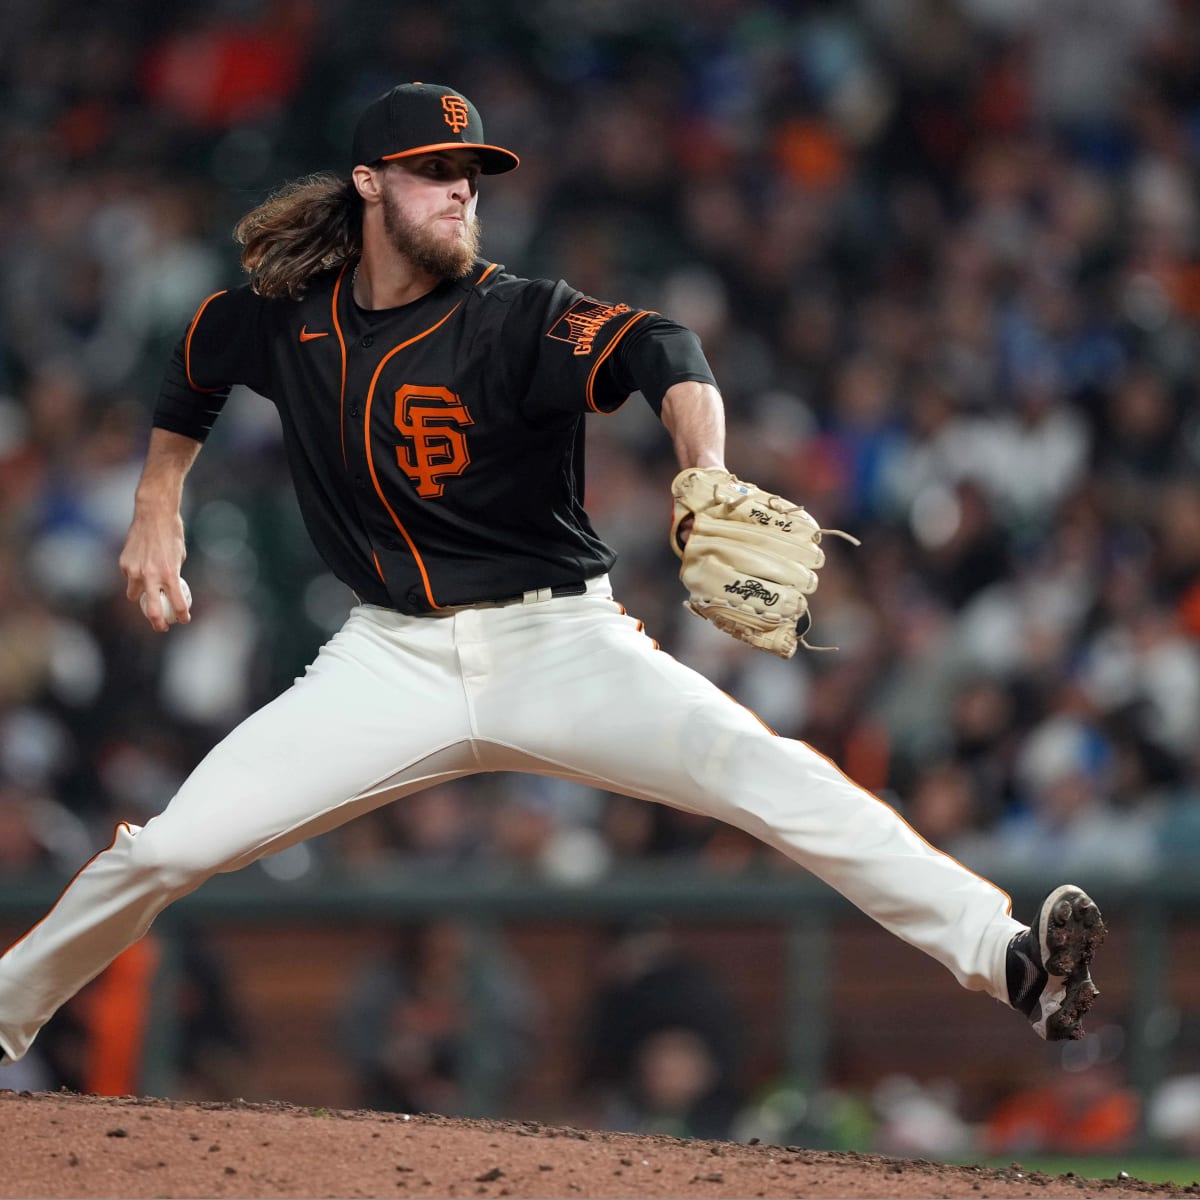 SF Giants on NBCS on X: The Giants were hurt by some questionable